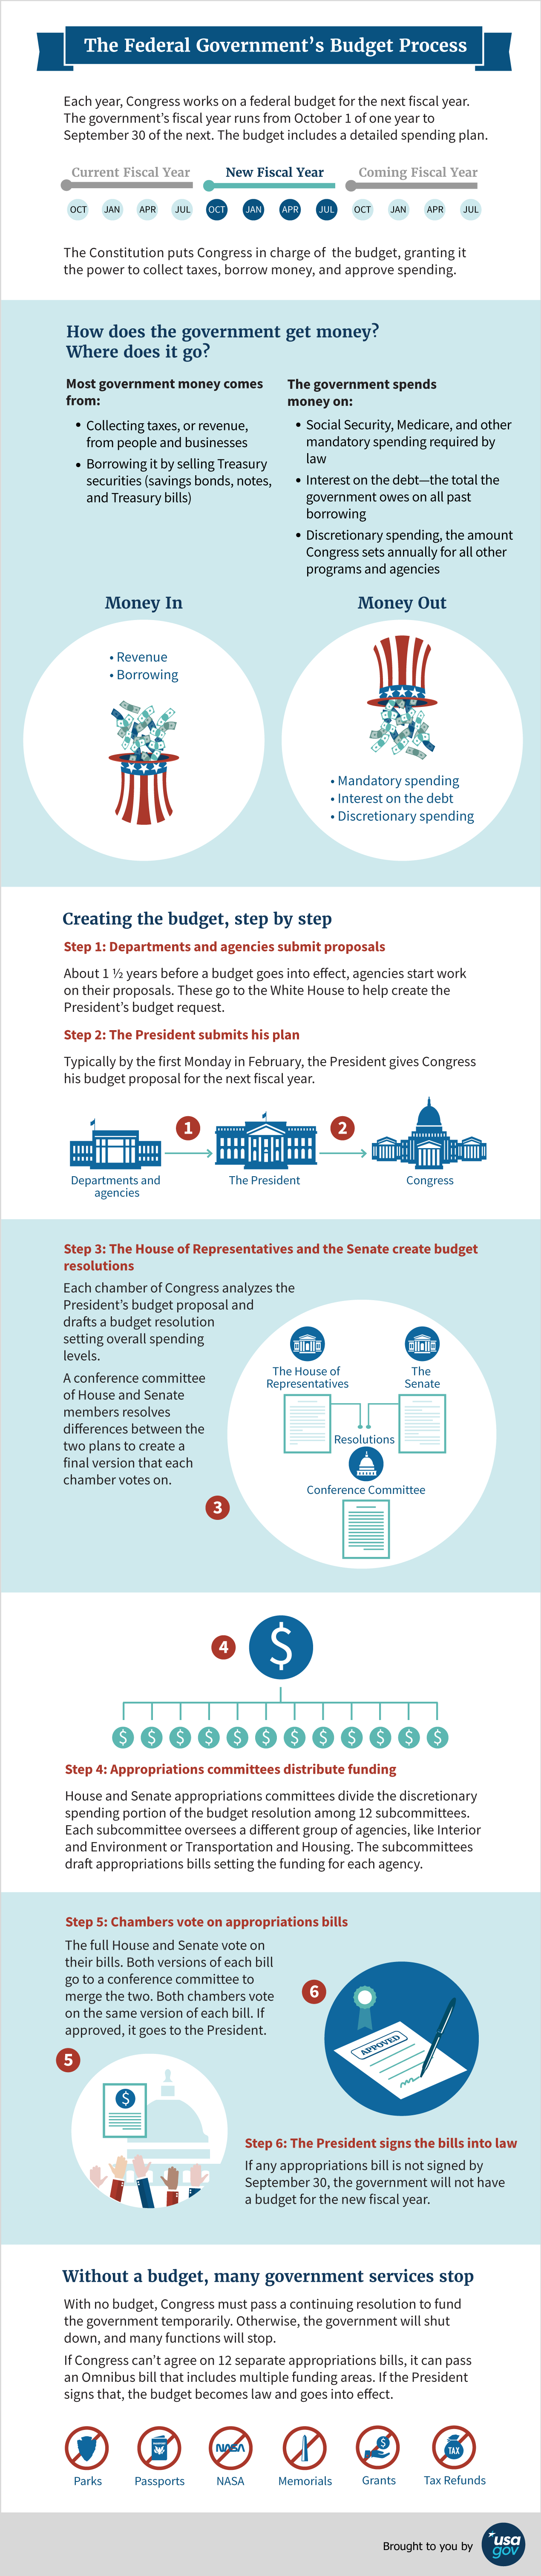 Infographic explaining the steps involved in creating an annual budget for the federal government.